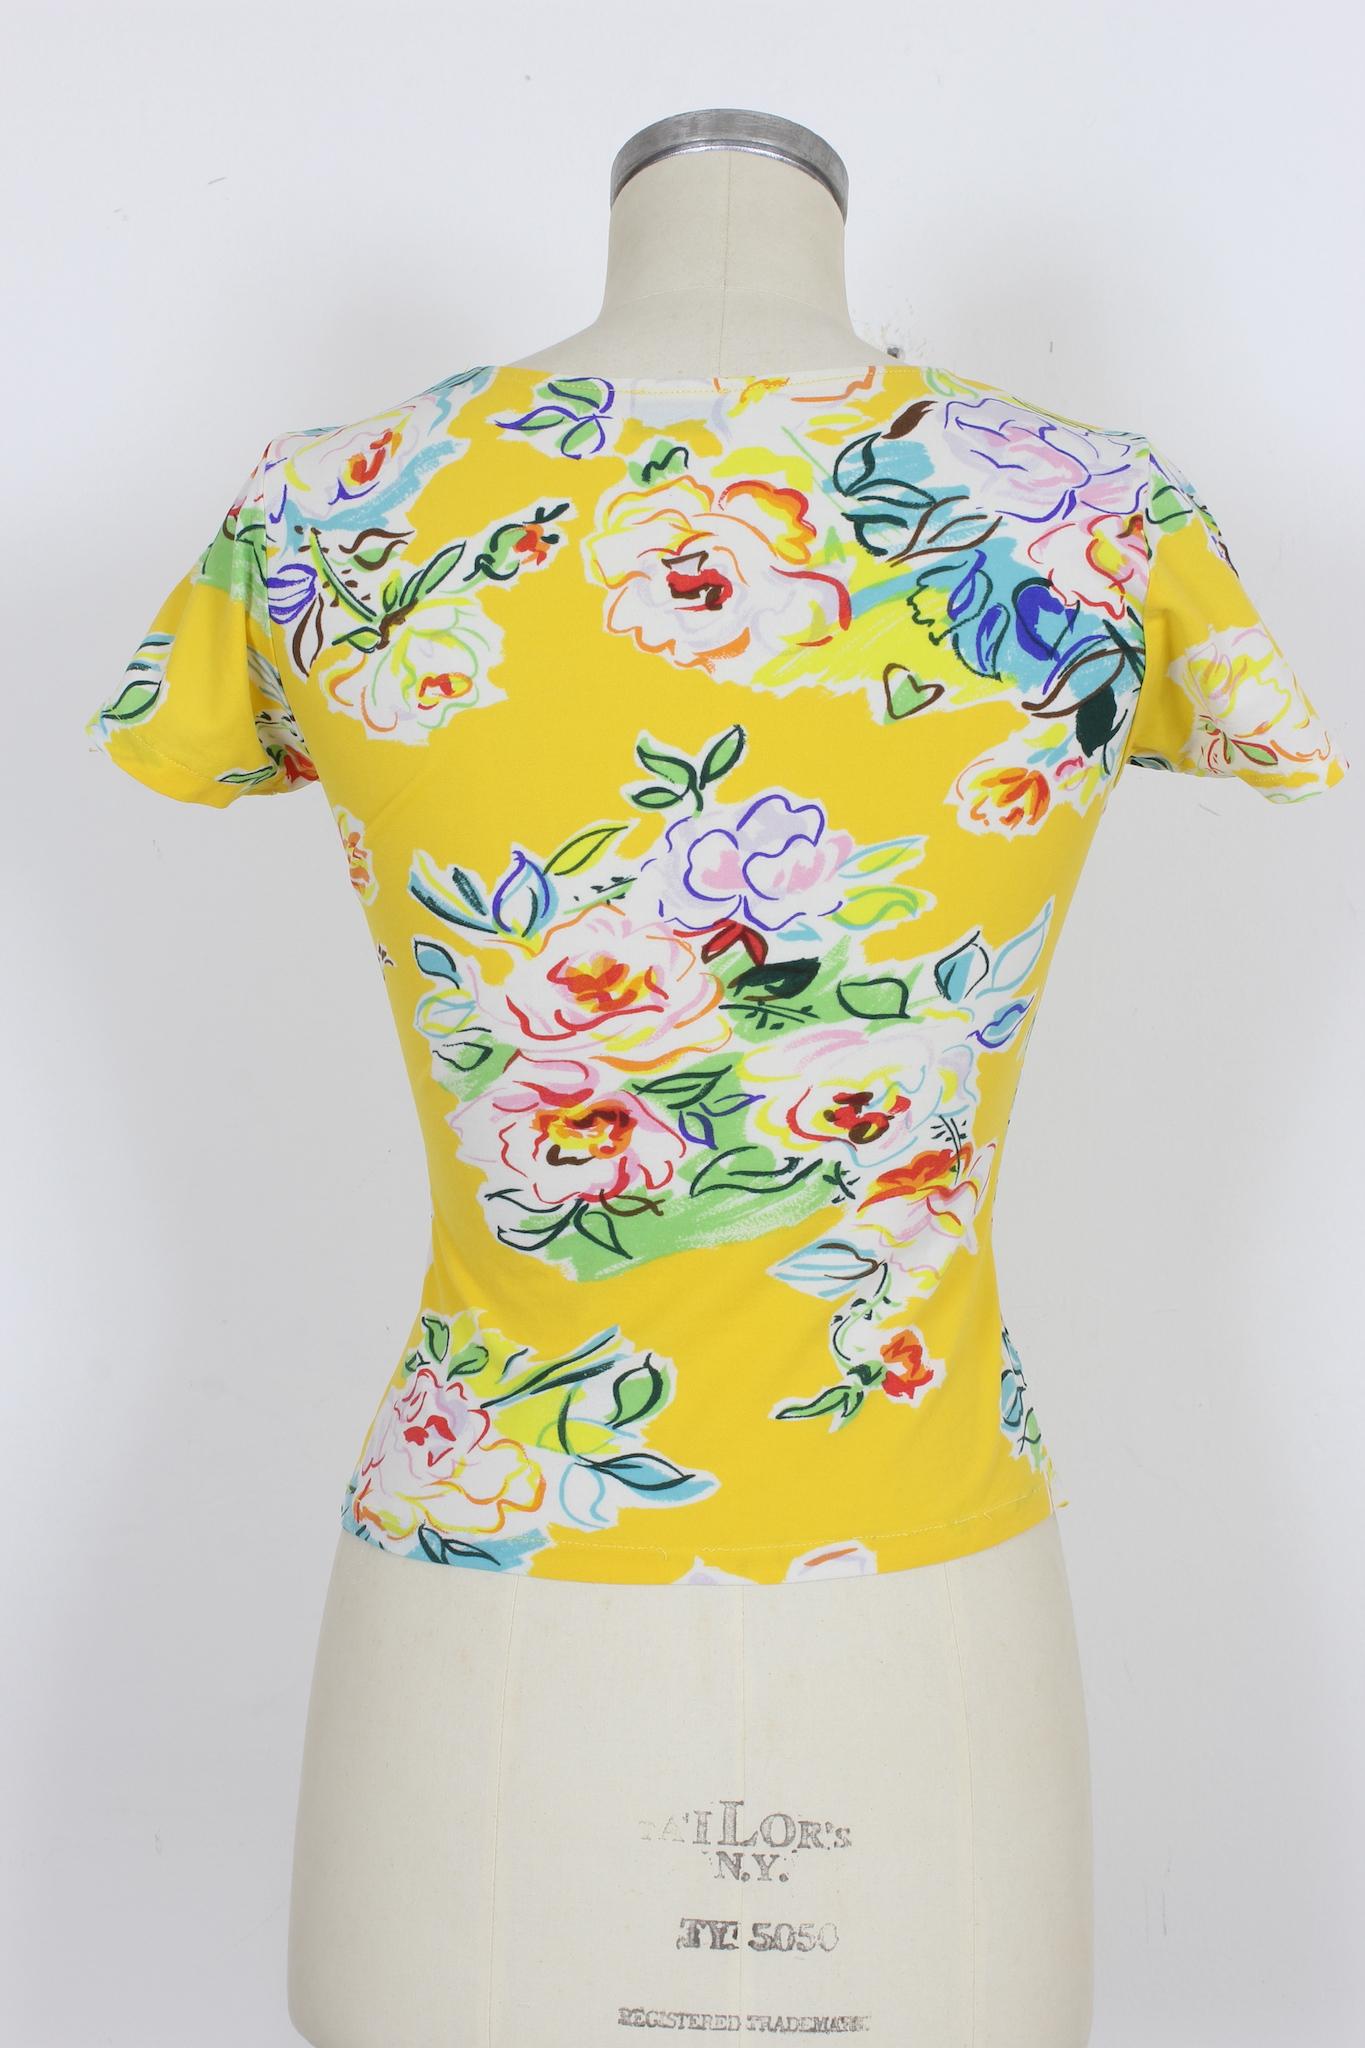 Kenzo Yellow Floral Casual T Shirt 2000s In Excellent Condition For Sale In Brindisi, Bt